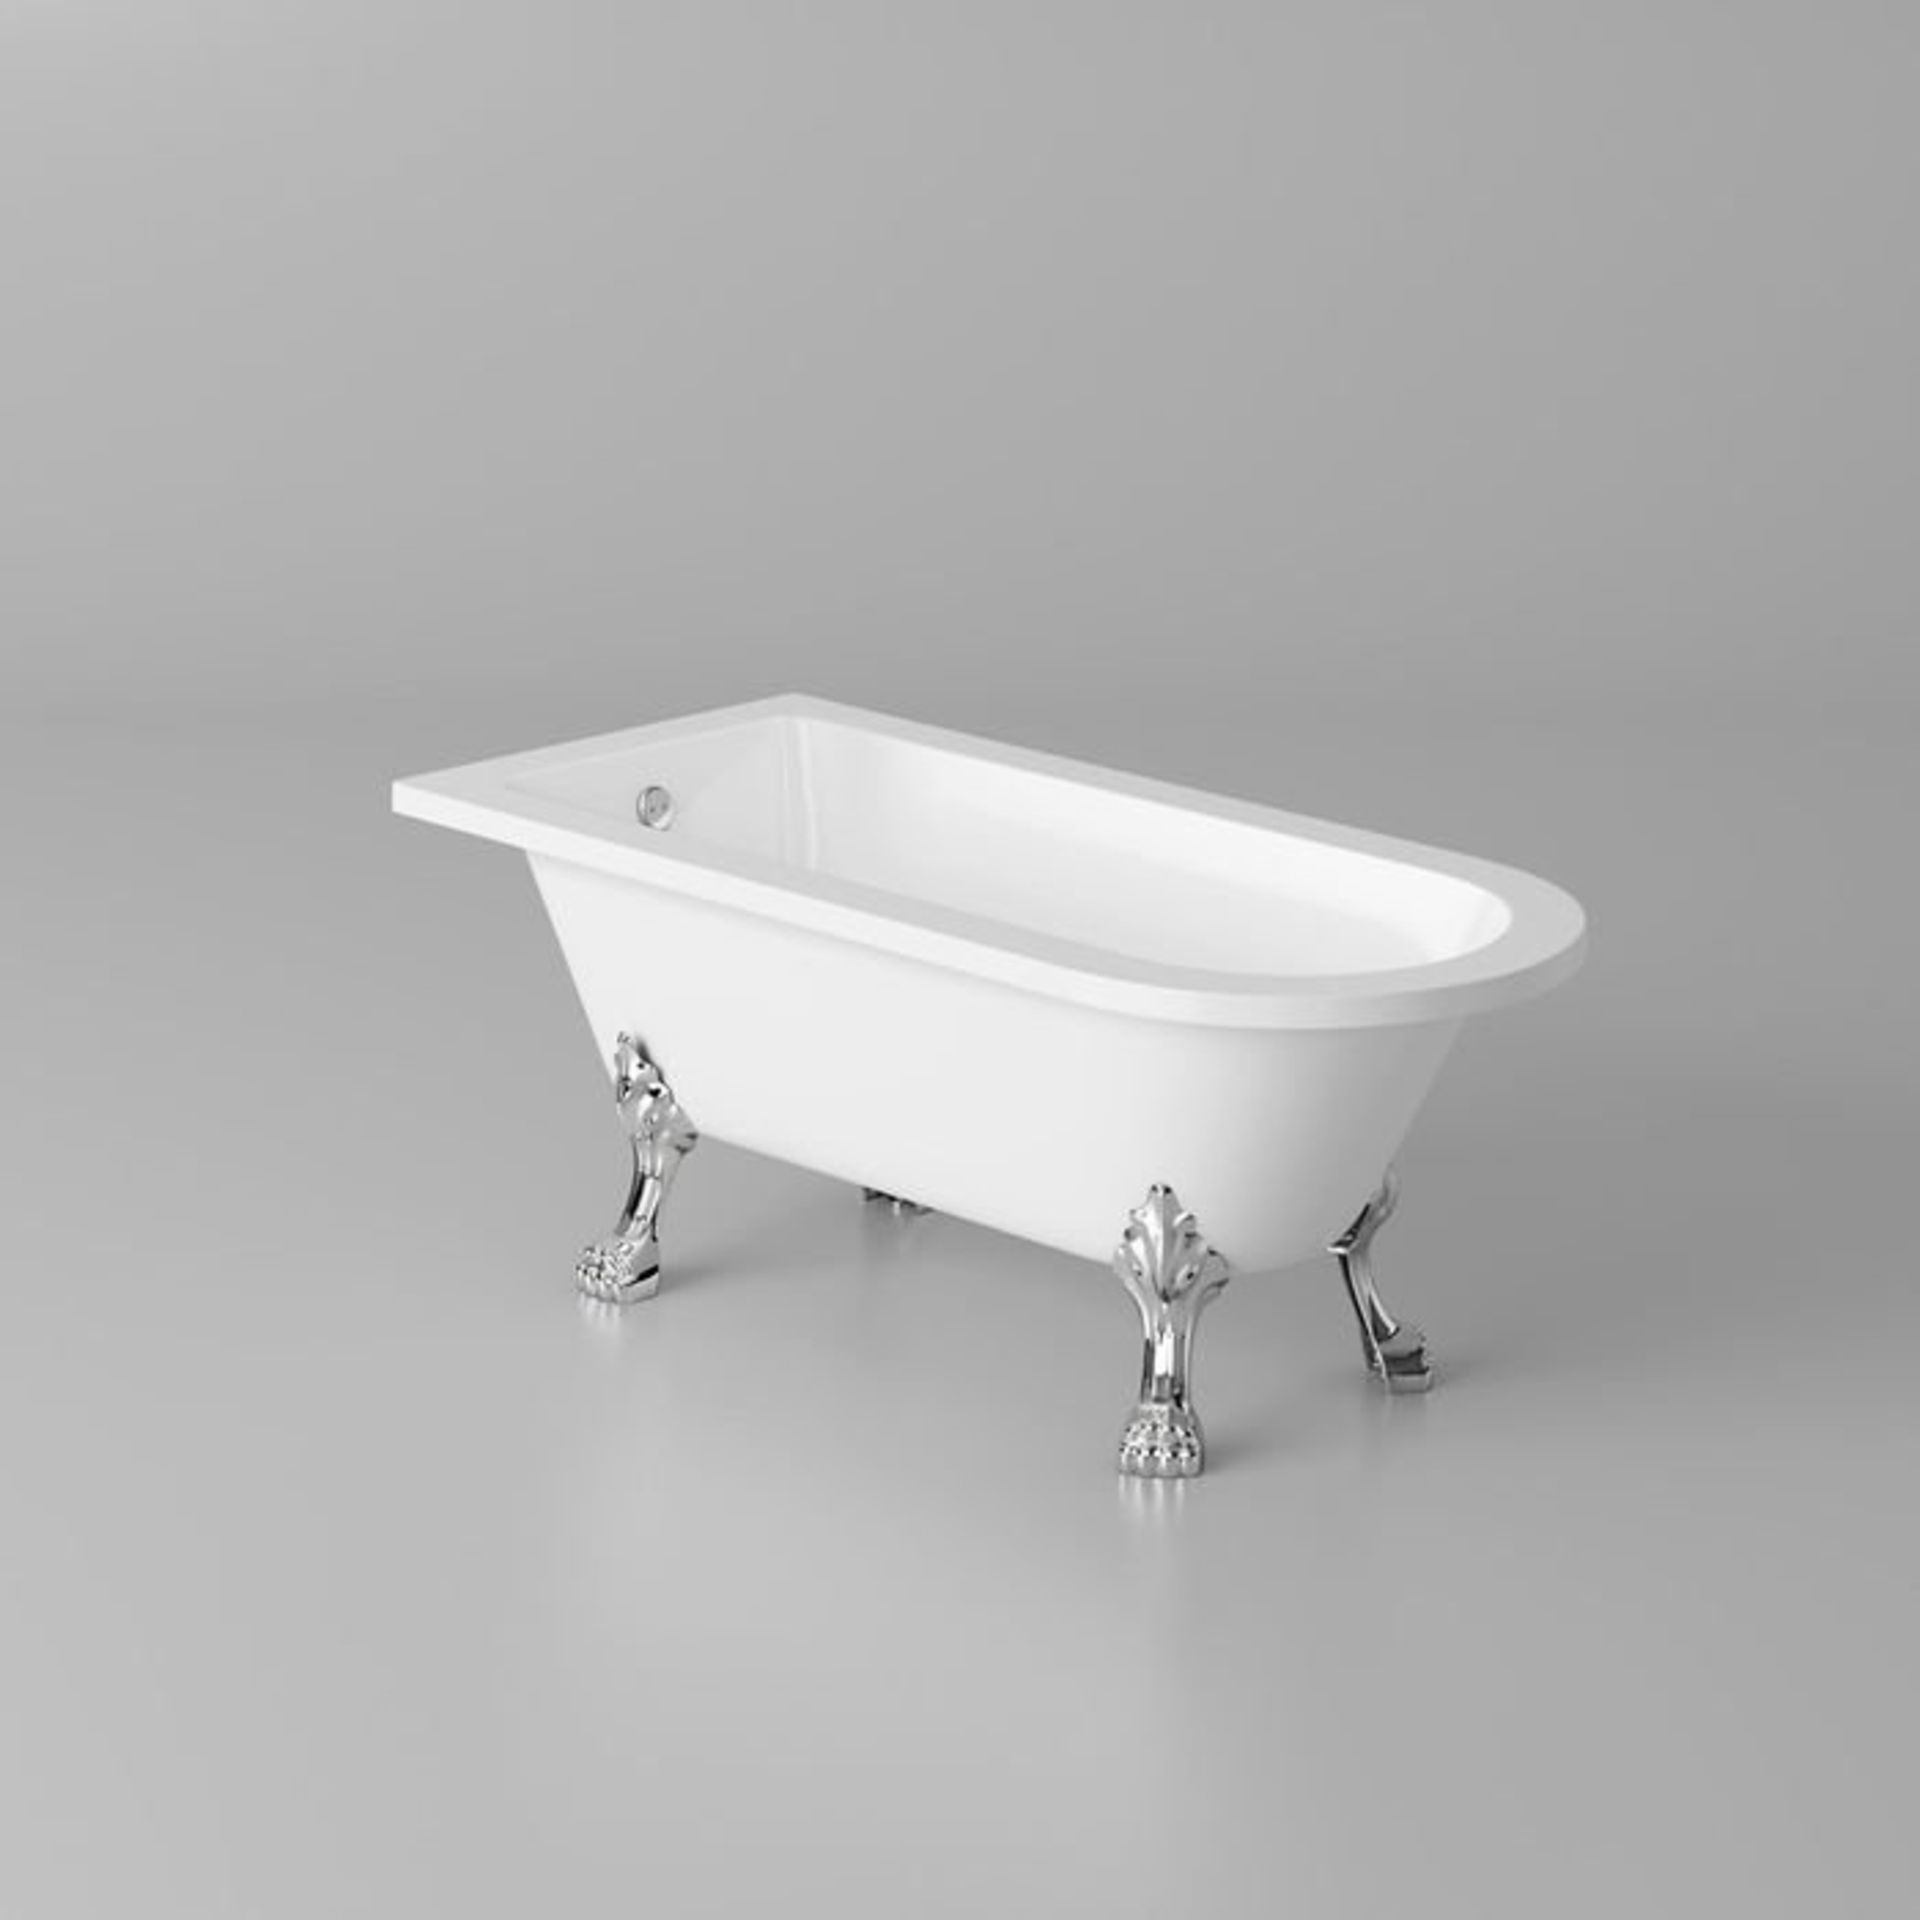 (G200) 1710mm Victoria Traditional Roll Top Back to Wall Bath - Dragon Feet. RRP £799.99. - Image 2 of 3